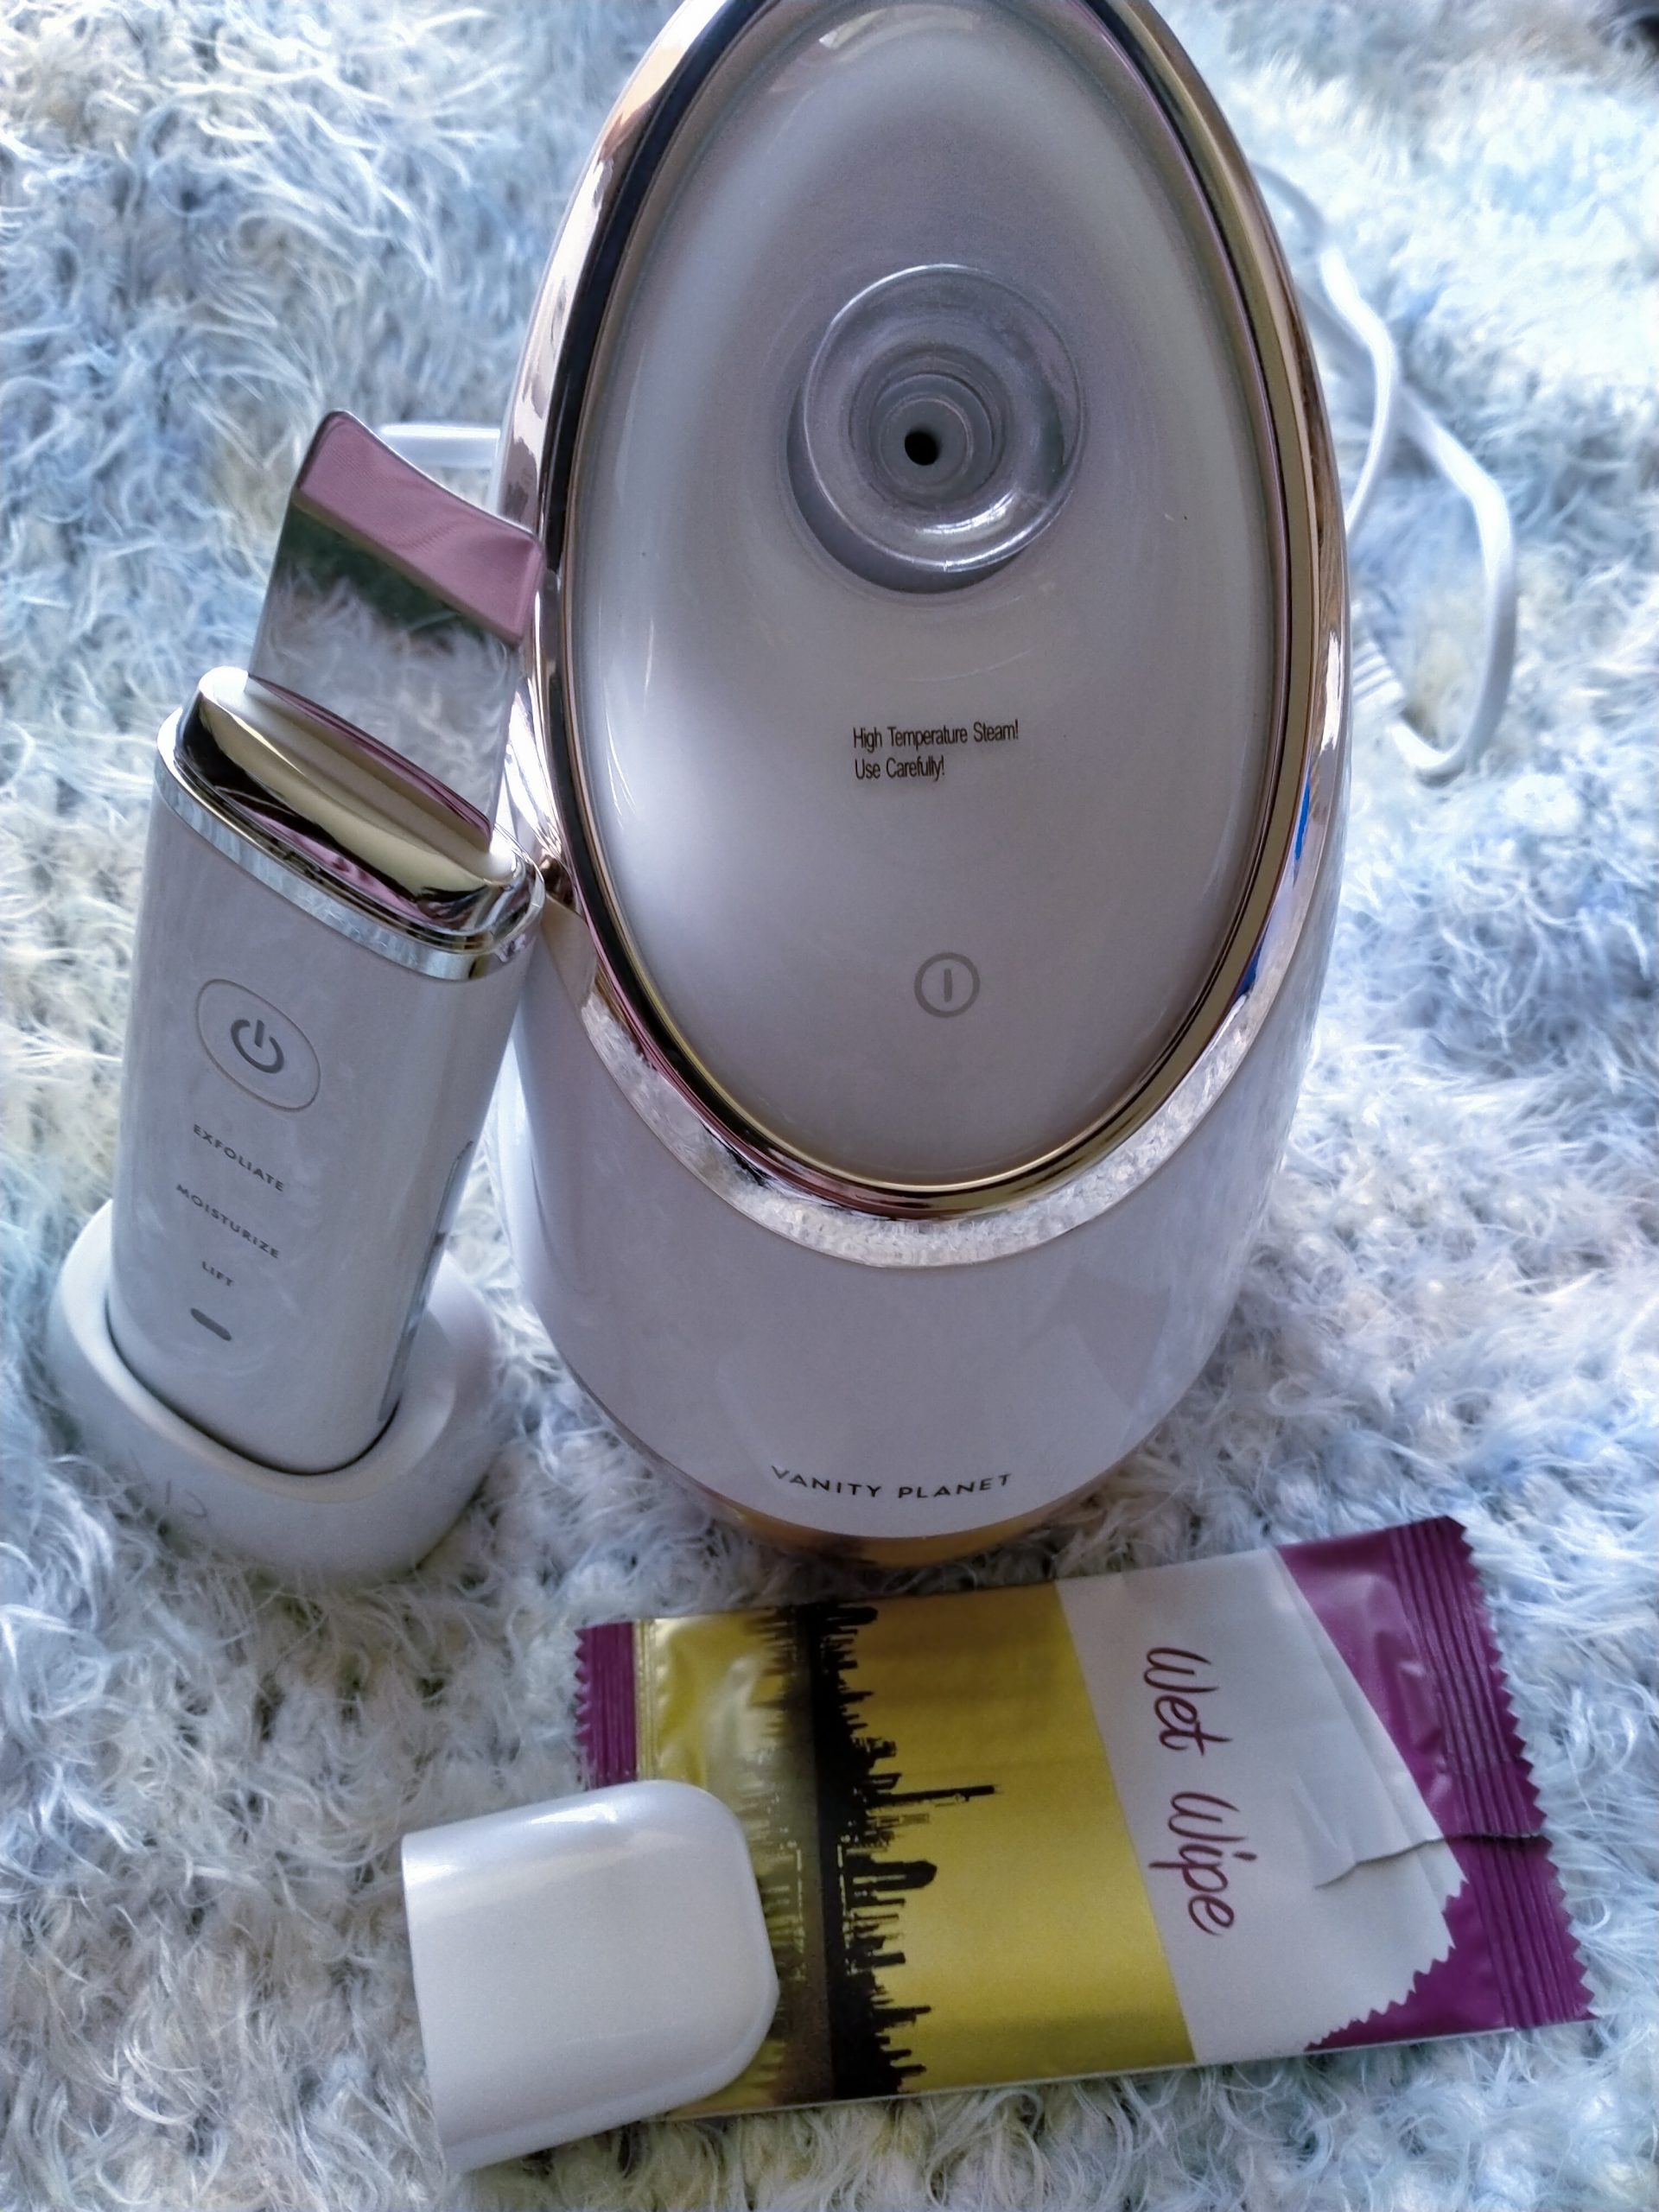 Do your Steam your Face? Try Vanity Planet’s Iconic Aera Facial Steamer